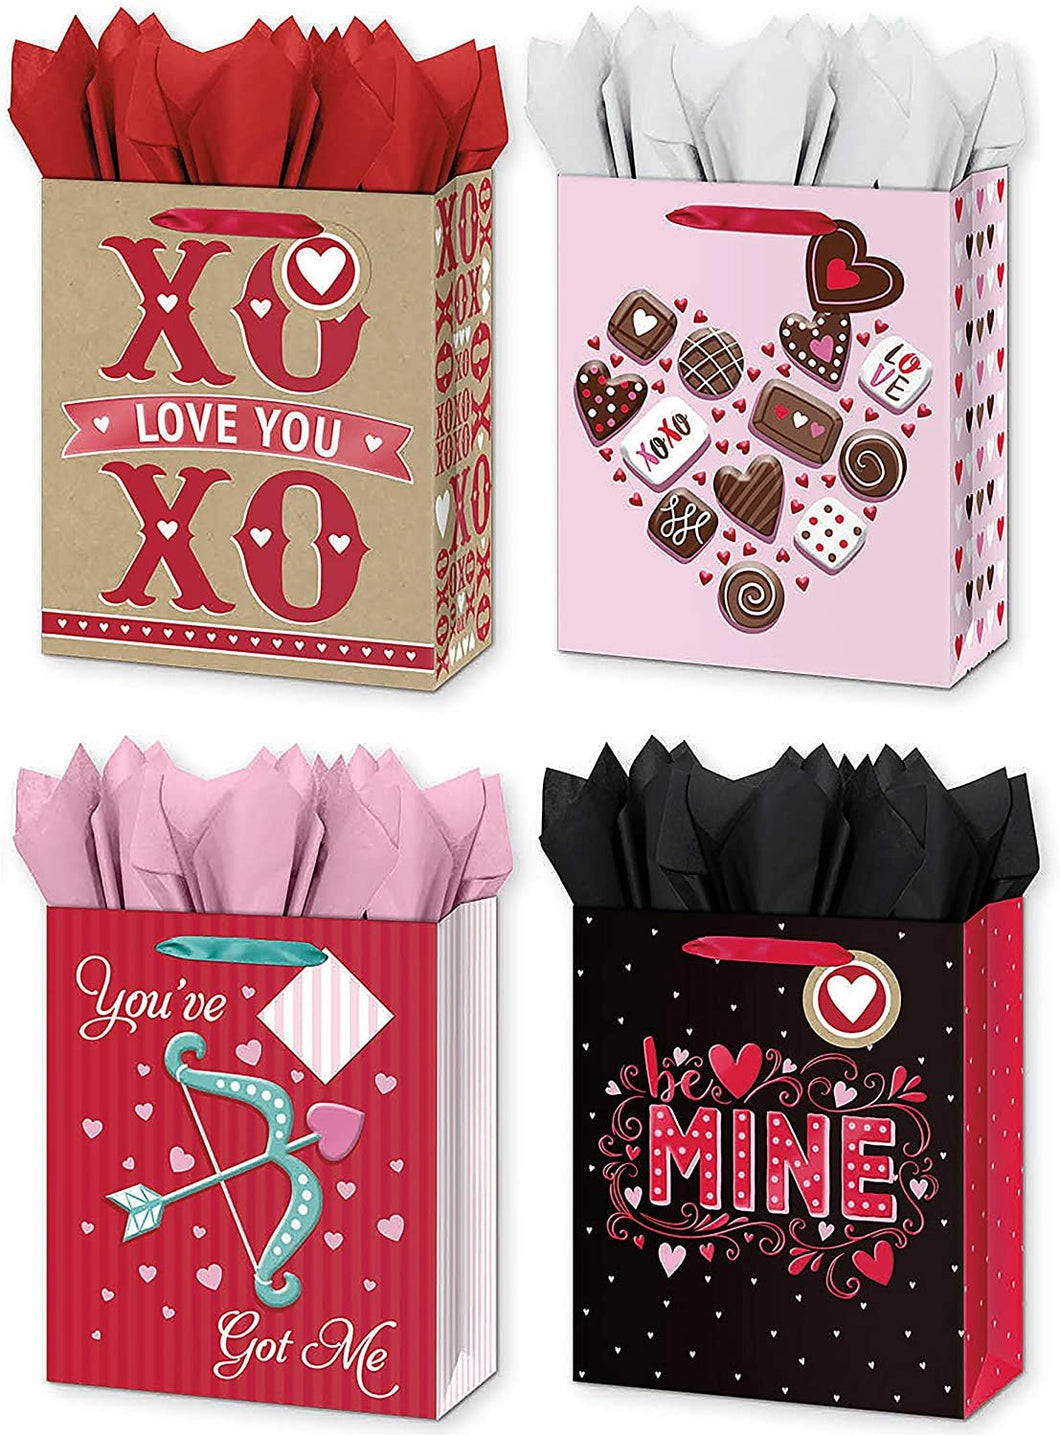 4 Large Valentines Day Gift Bags w/Tissue Paper Included Designed with - XOXO, Be Mine, Hearts, & More